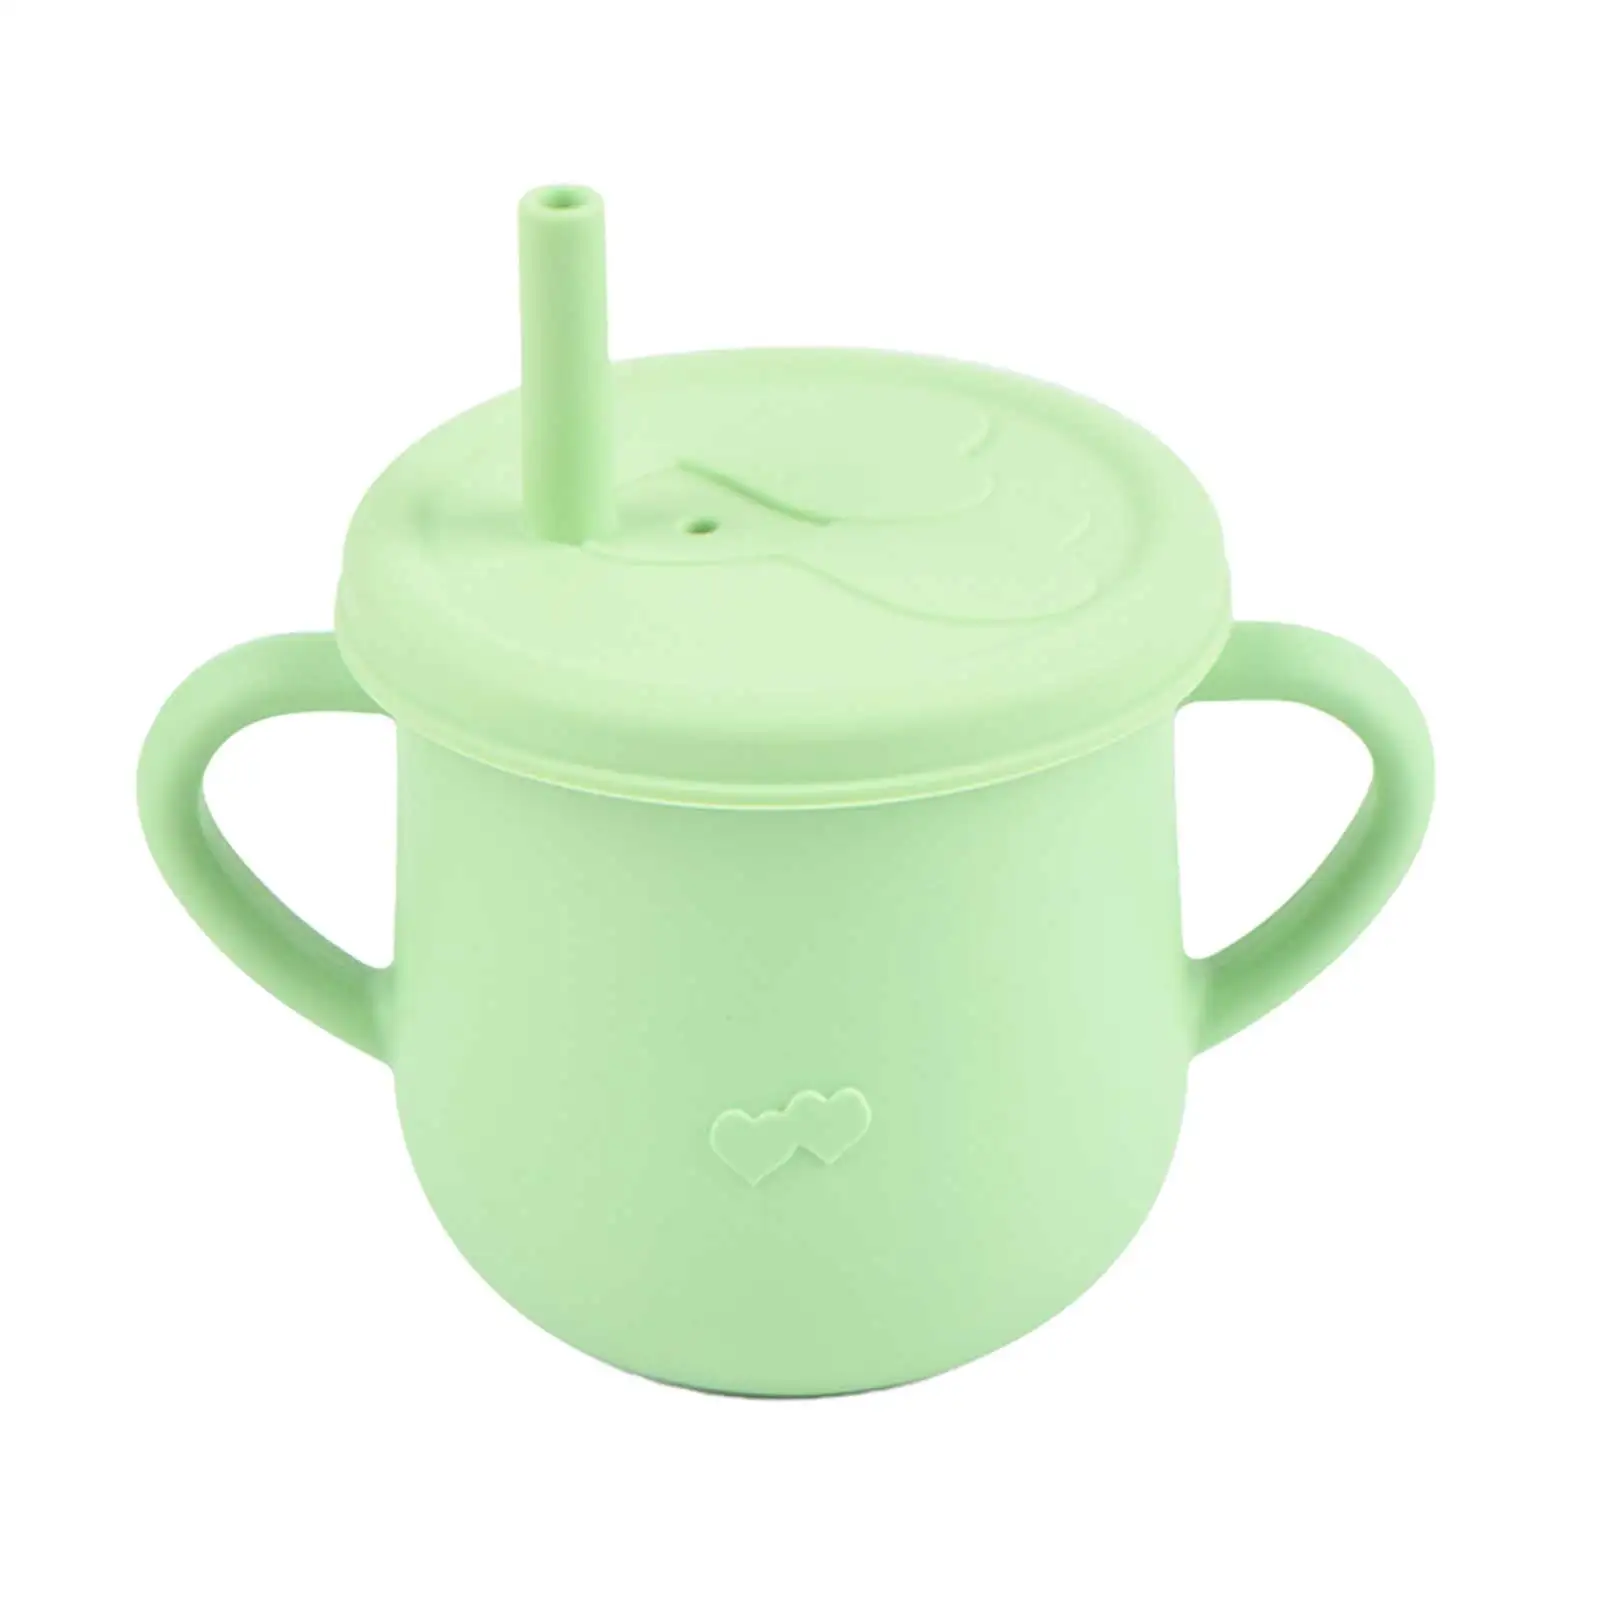 

Baby Training Cup Food Grade Silicone Sippy Cups Leakproof Drinking Straw Cup Feeding Drinkware Nontoxic Cup Tableware BPA FREE